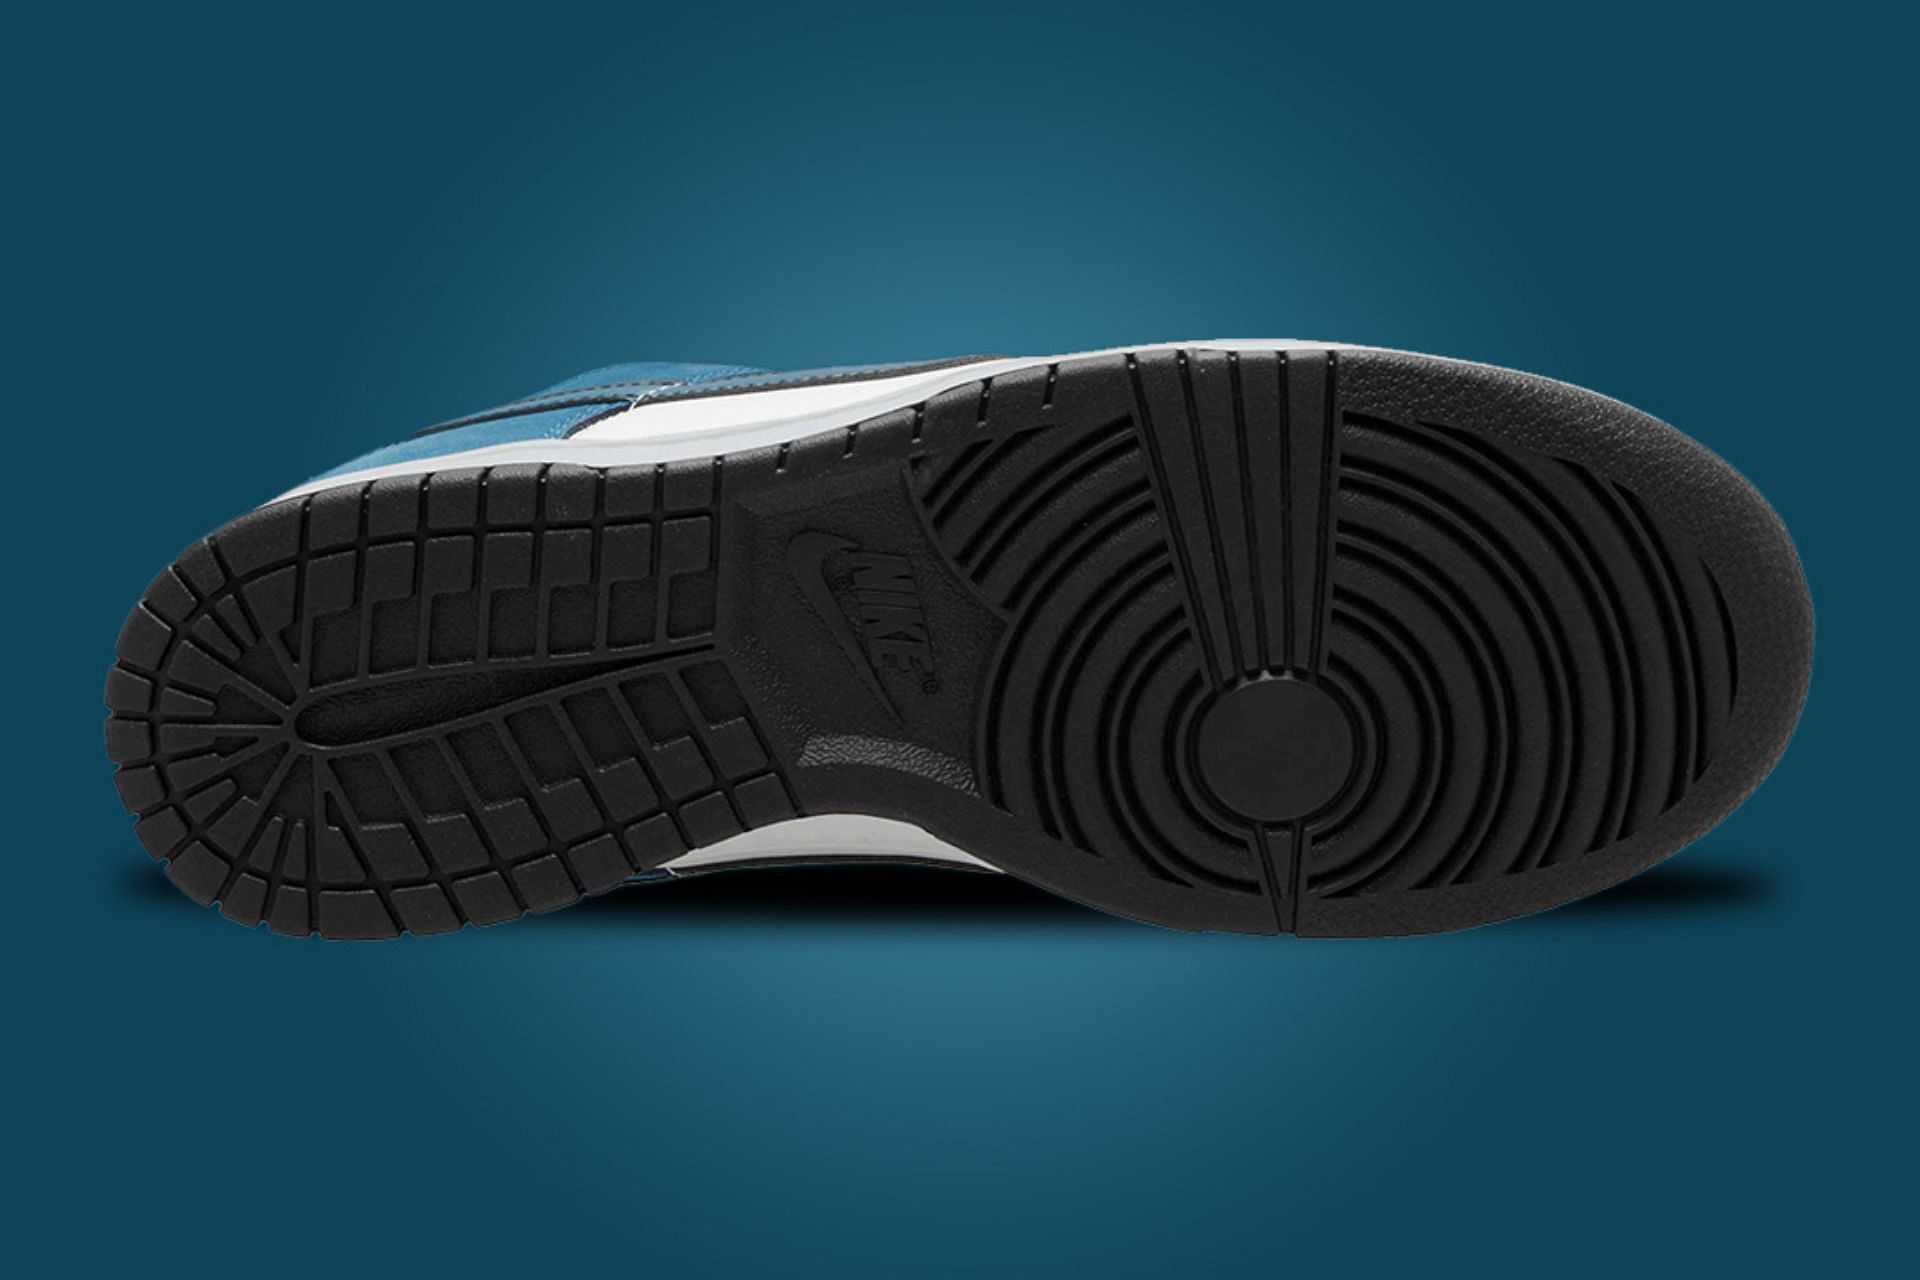 The black outsoles are used for the bottom of these sneakers (Image via Nike)